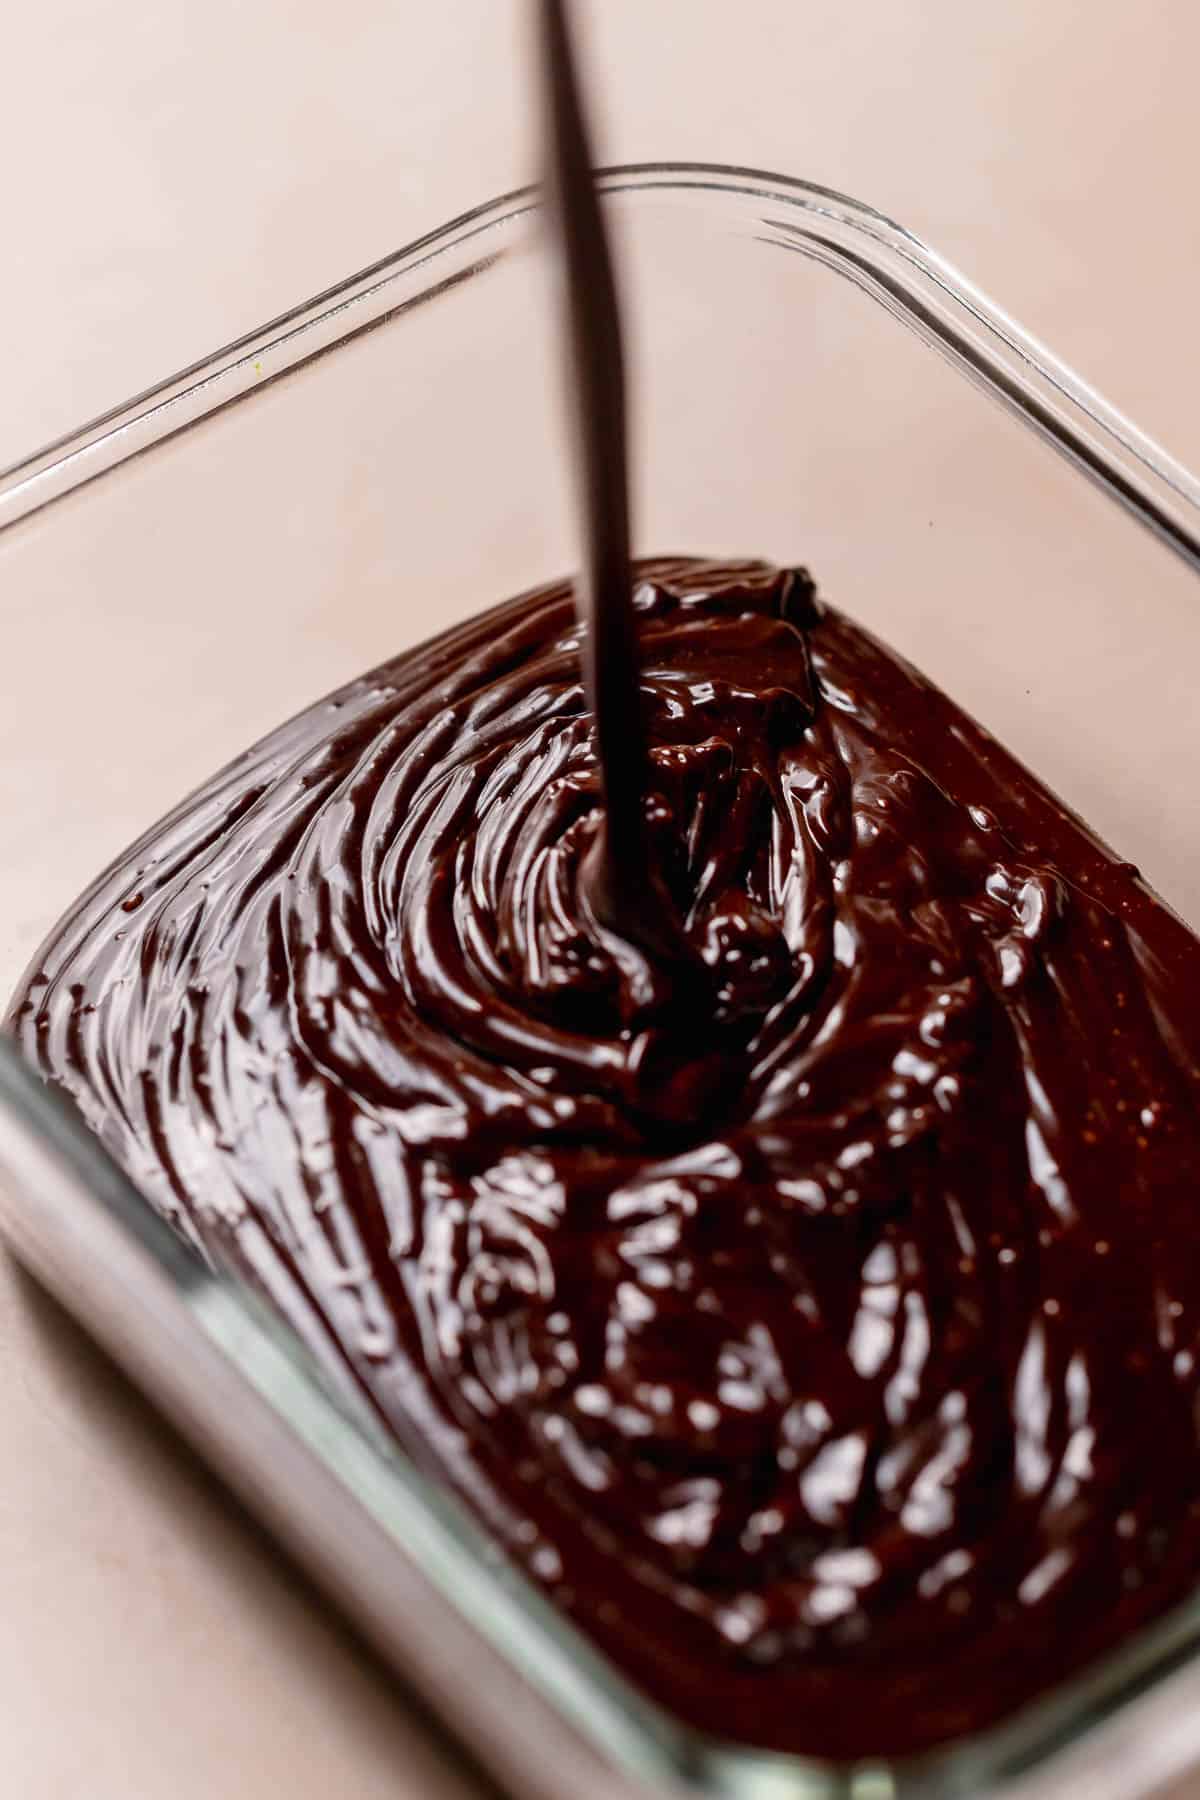 The chocolate fudge icing being poured into a container to set overnight.